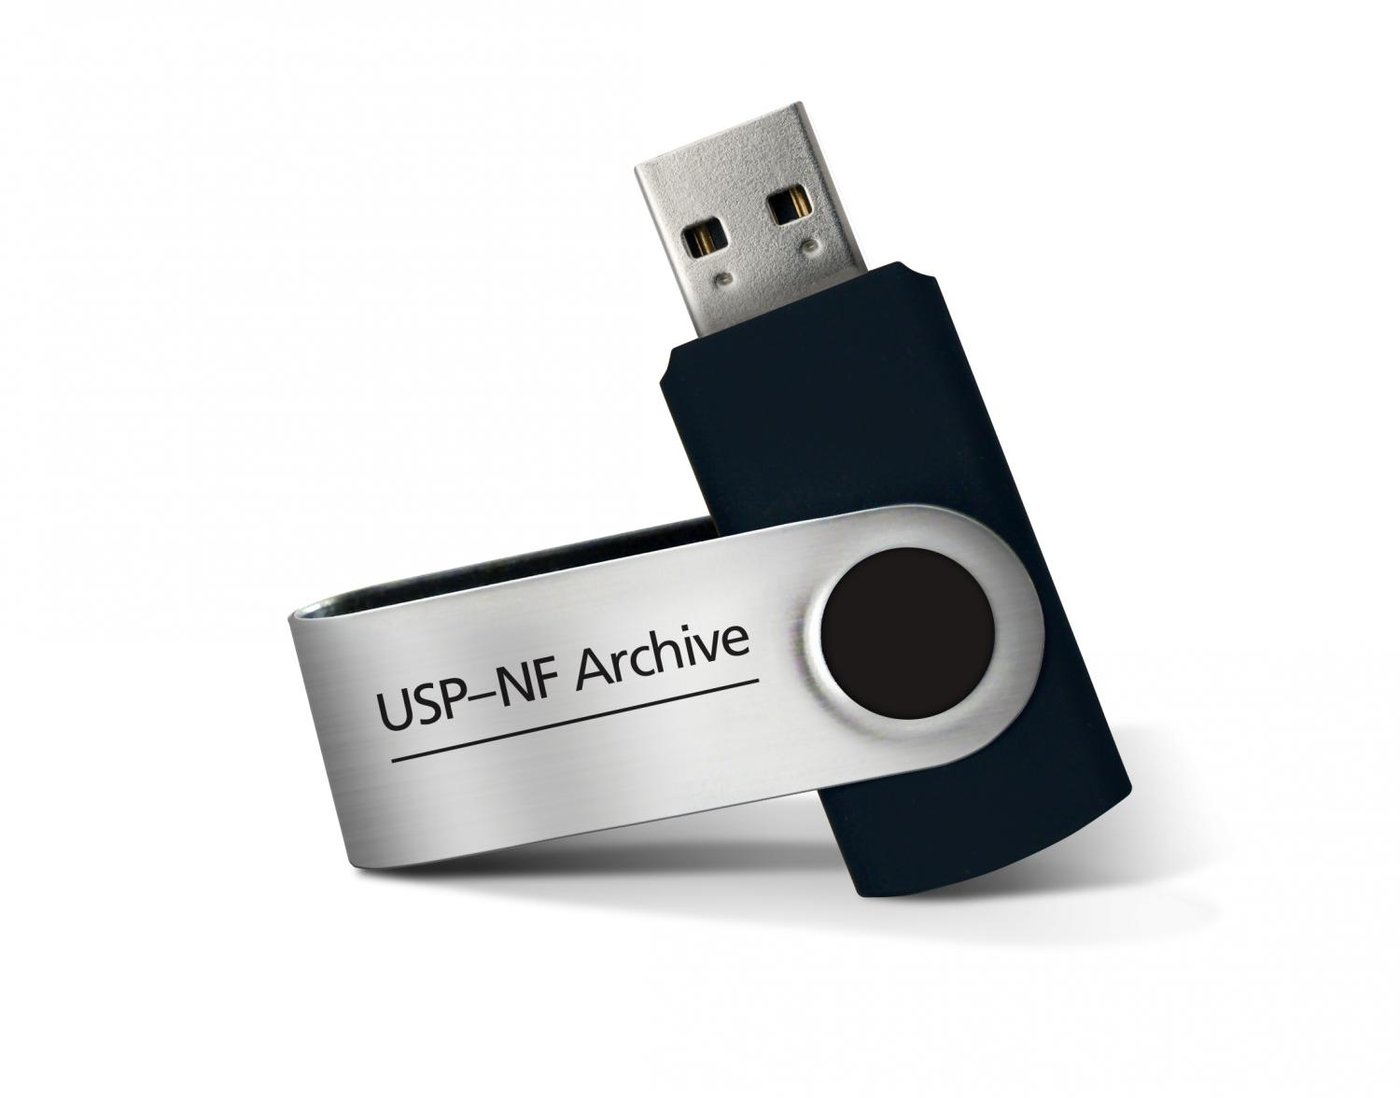 USP-NF Archive USP38-NF33
United States Pharmacopoeia and National Formulary
single user, USB-Stick